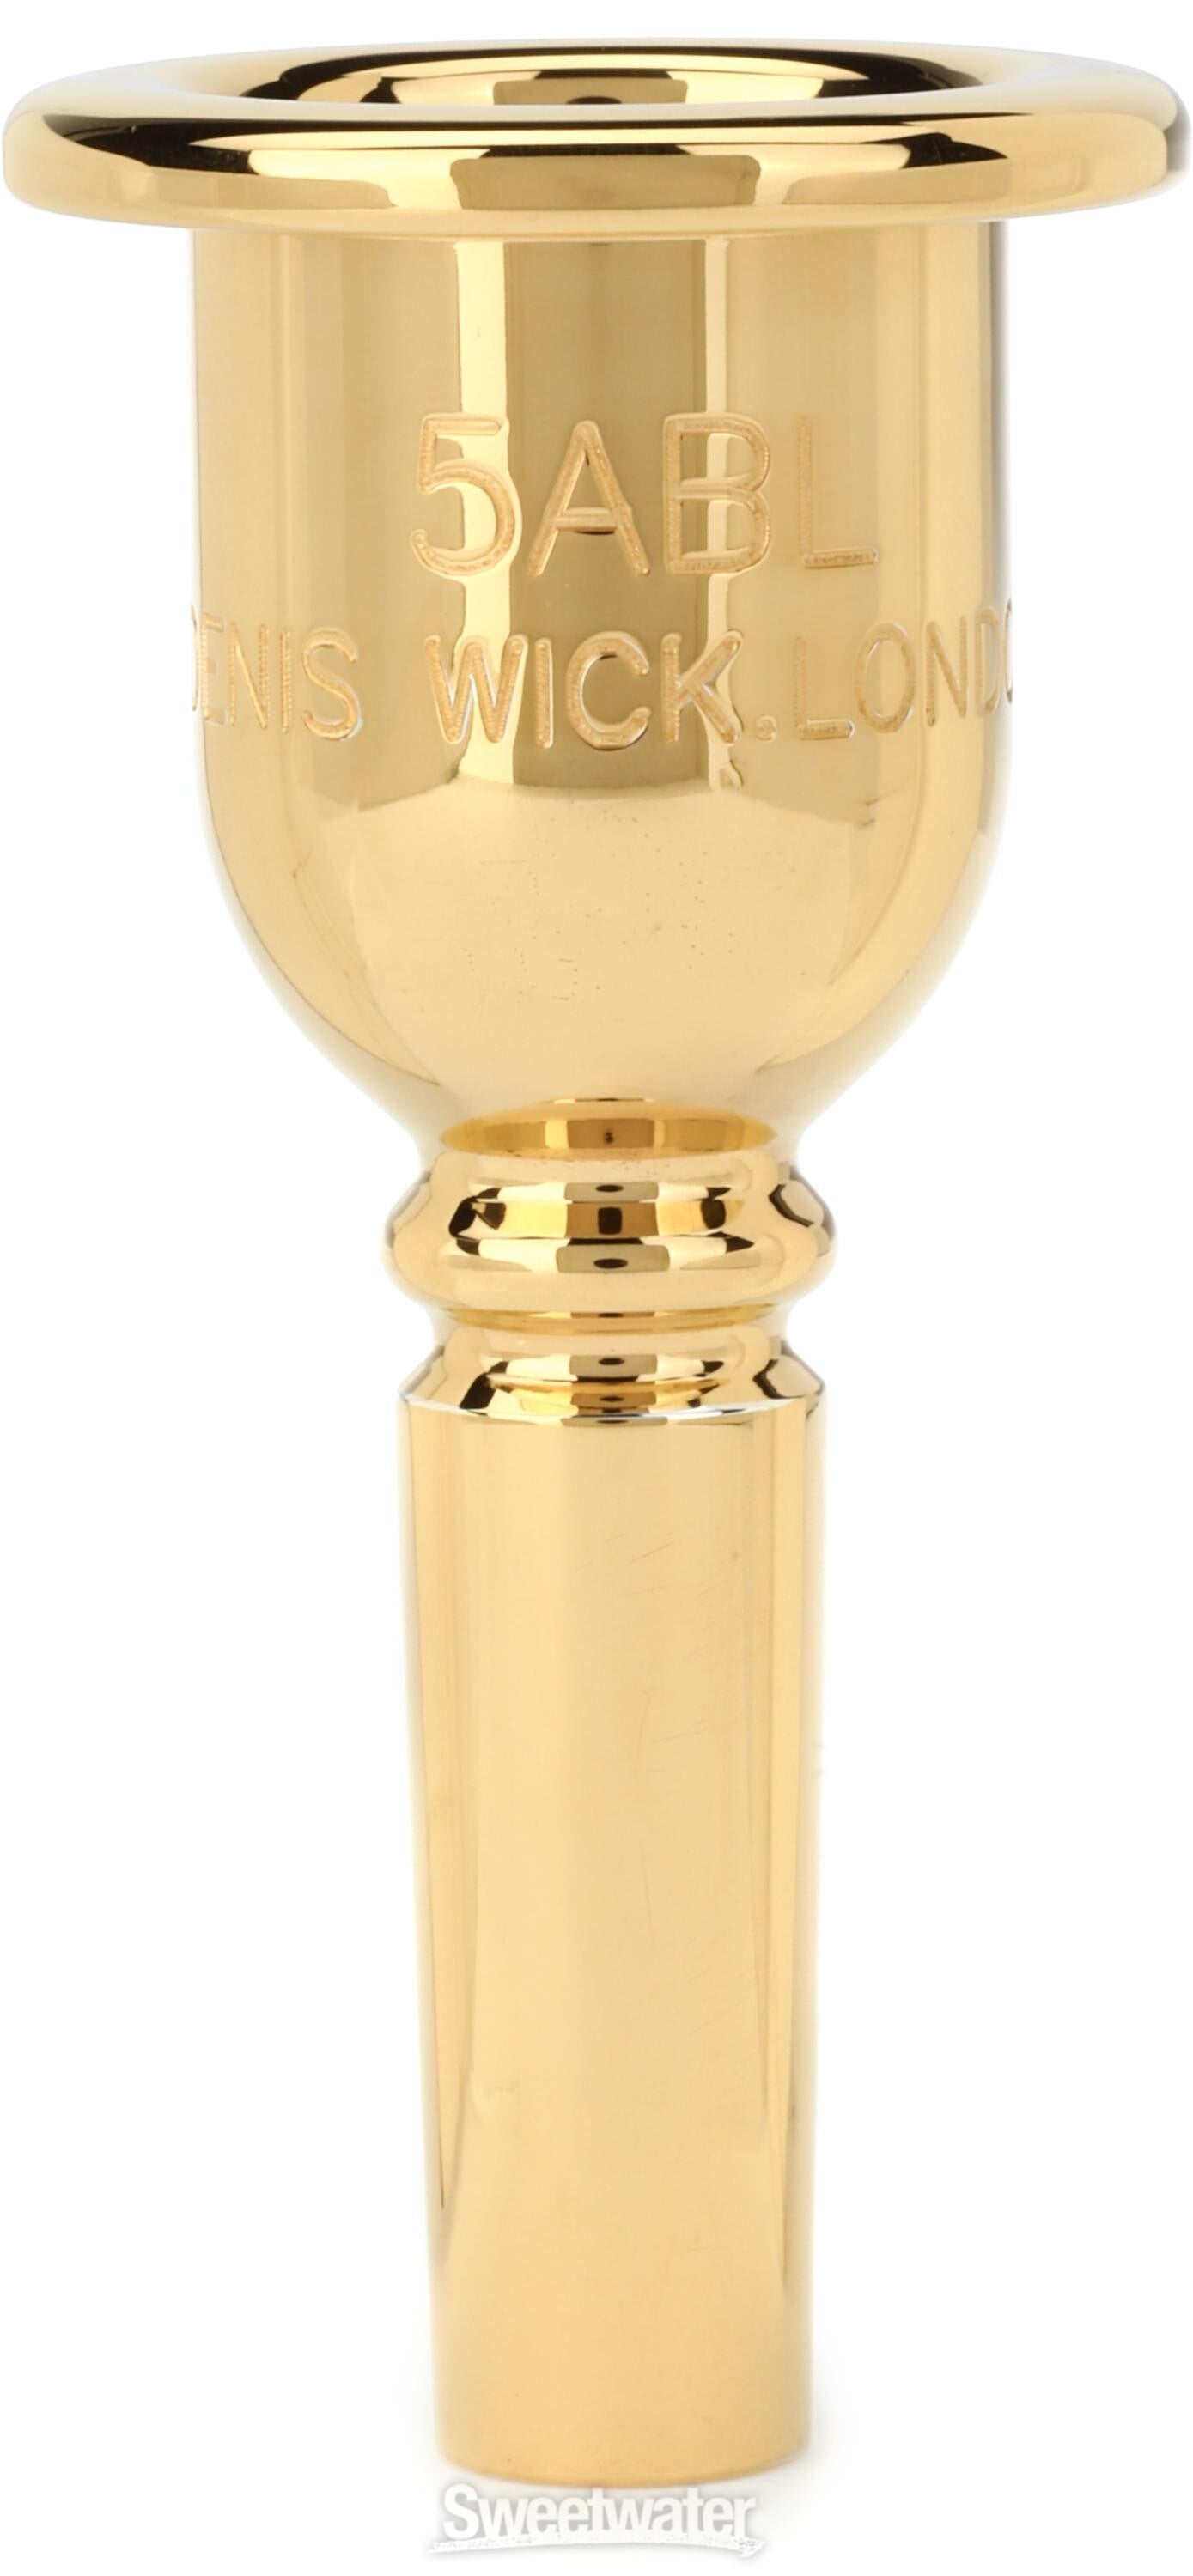 Denis Wick 5ABL Heritage Series Trombone Mouthpiece - 5ABL Gold